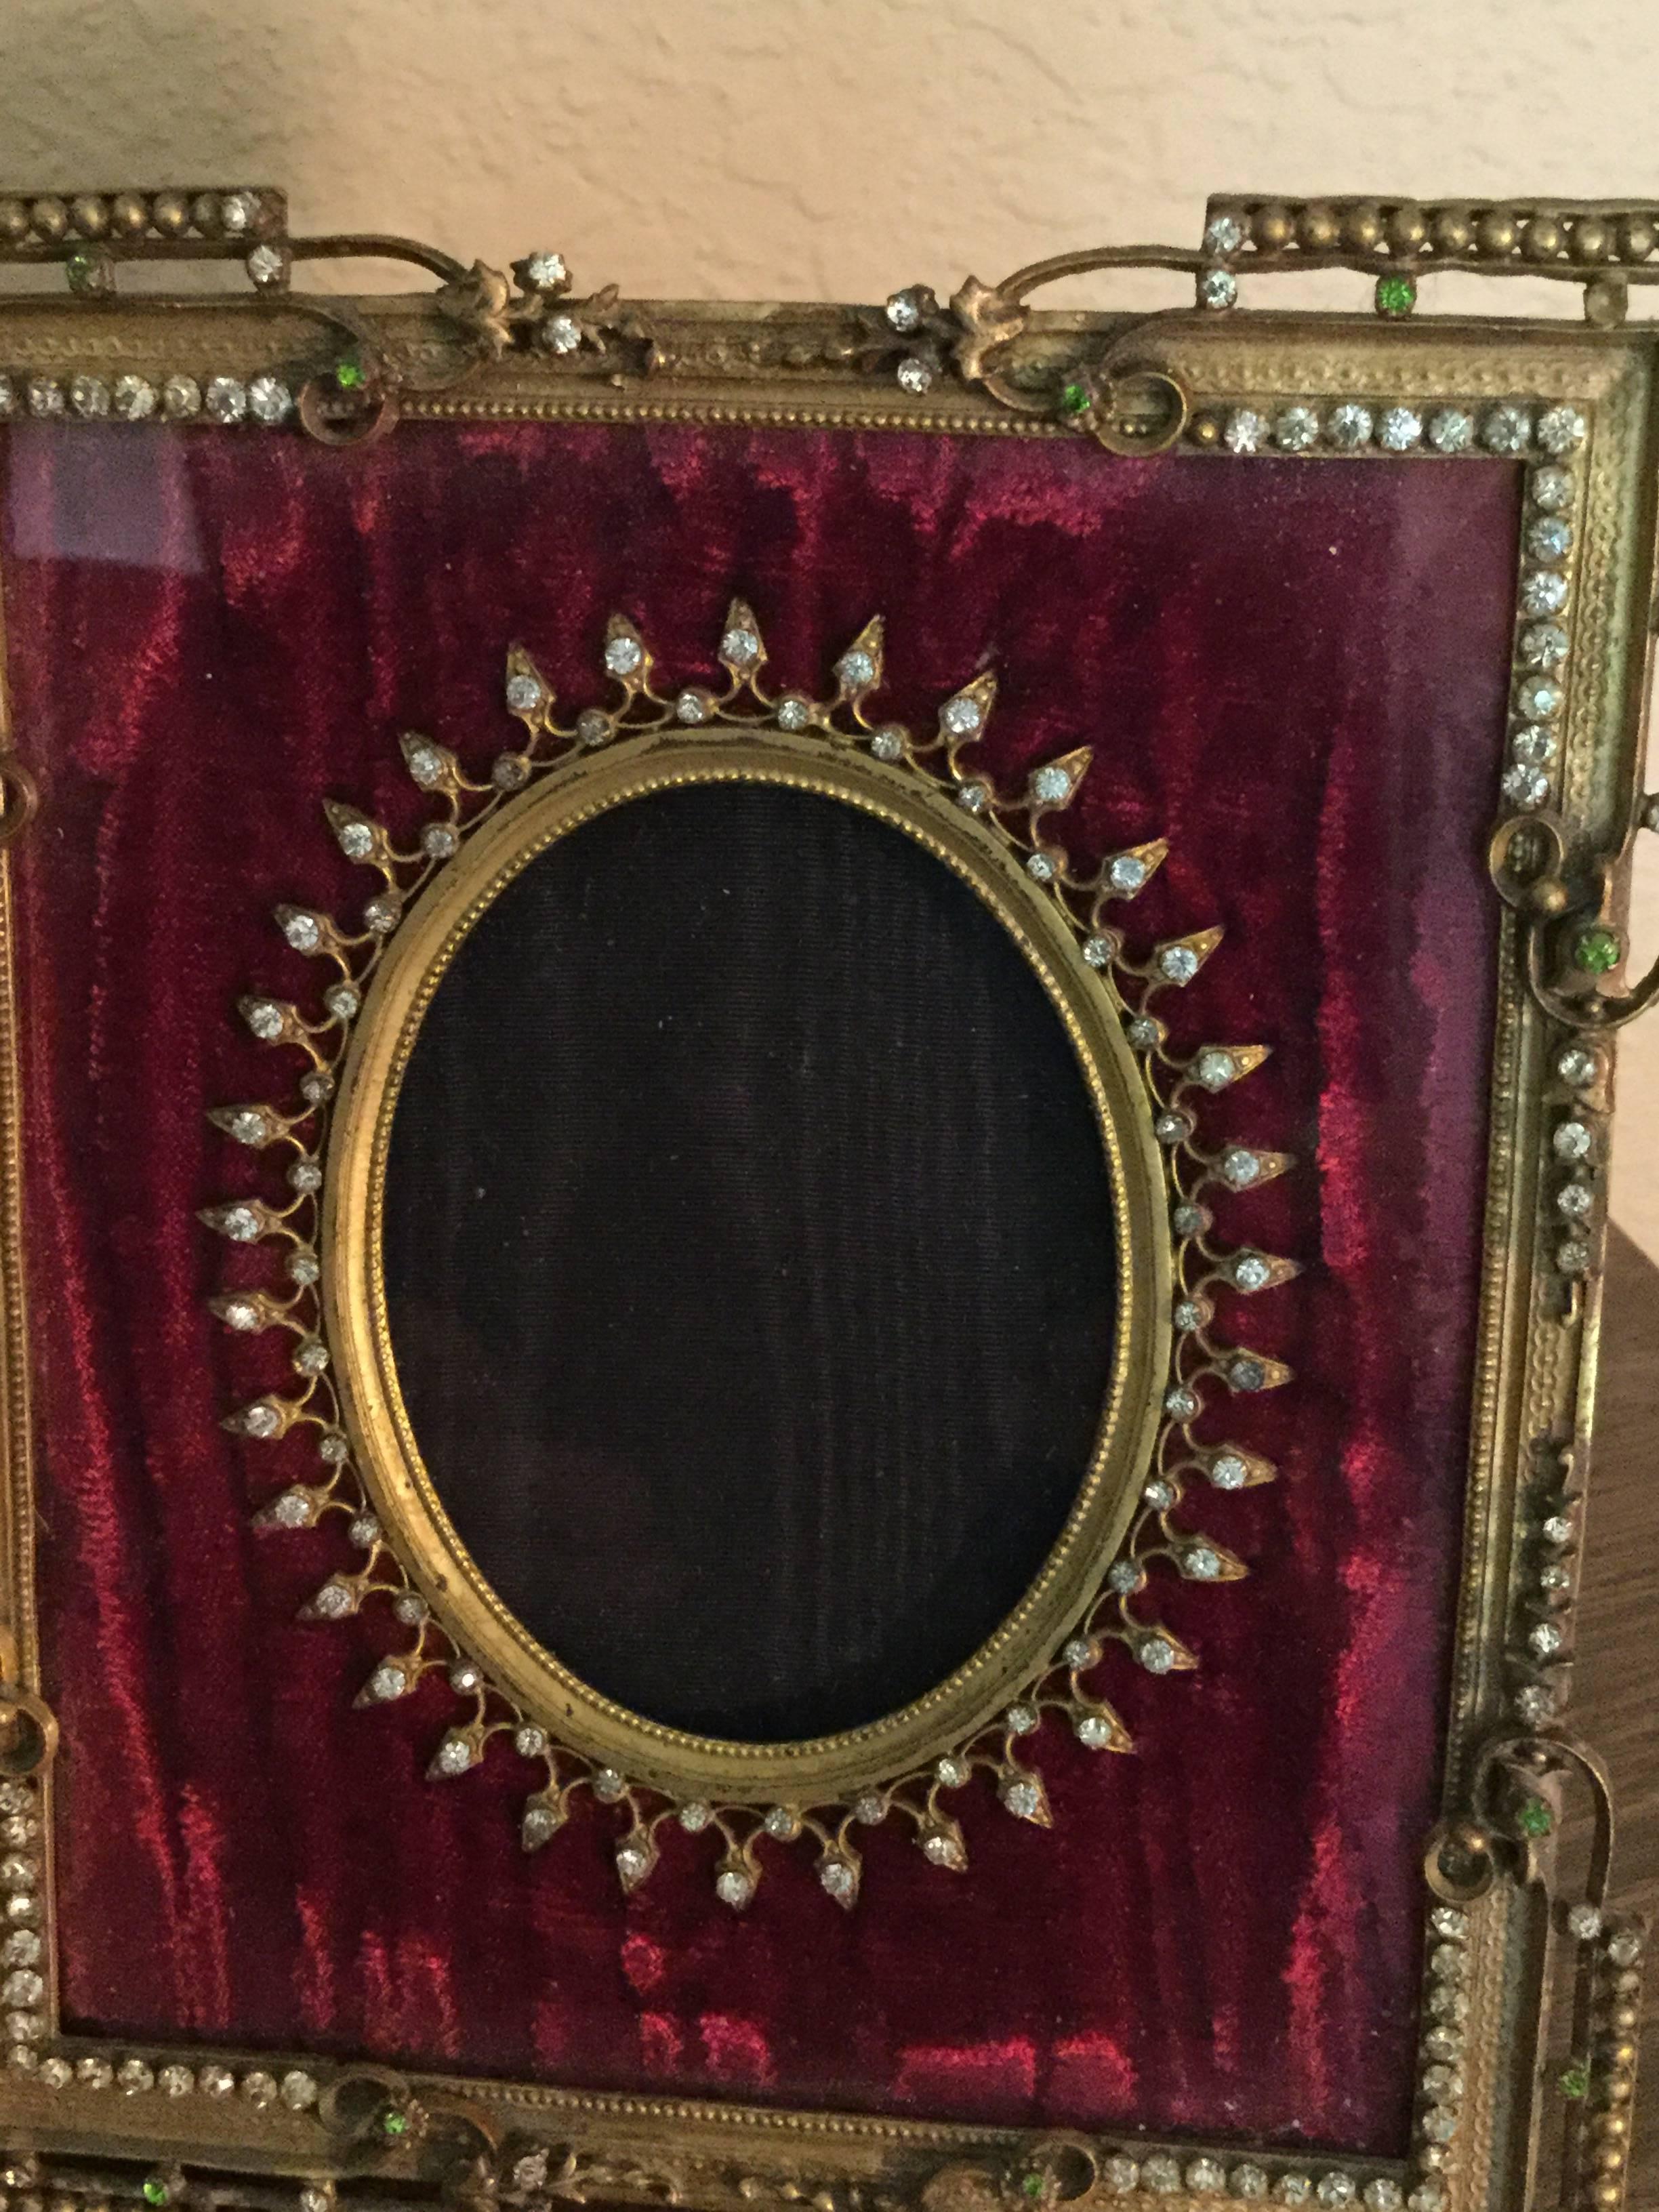 Fabulous antique French, Louis XVI style bronze/brass photograph or picture frame with approximately 118 paste jewels on the exterior and 36 larger stones on the inside oval circle with 34 smaller stones that loop the larger ones together. The